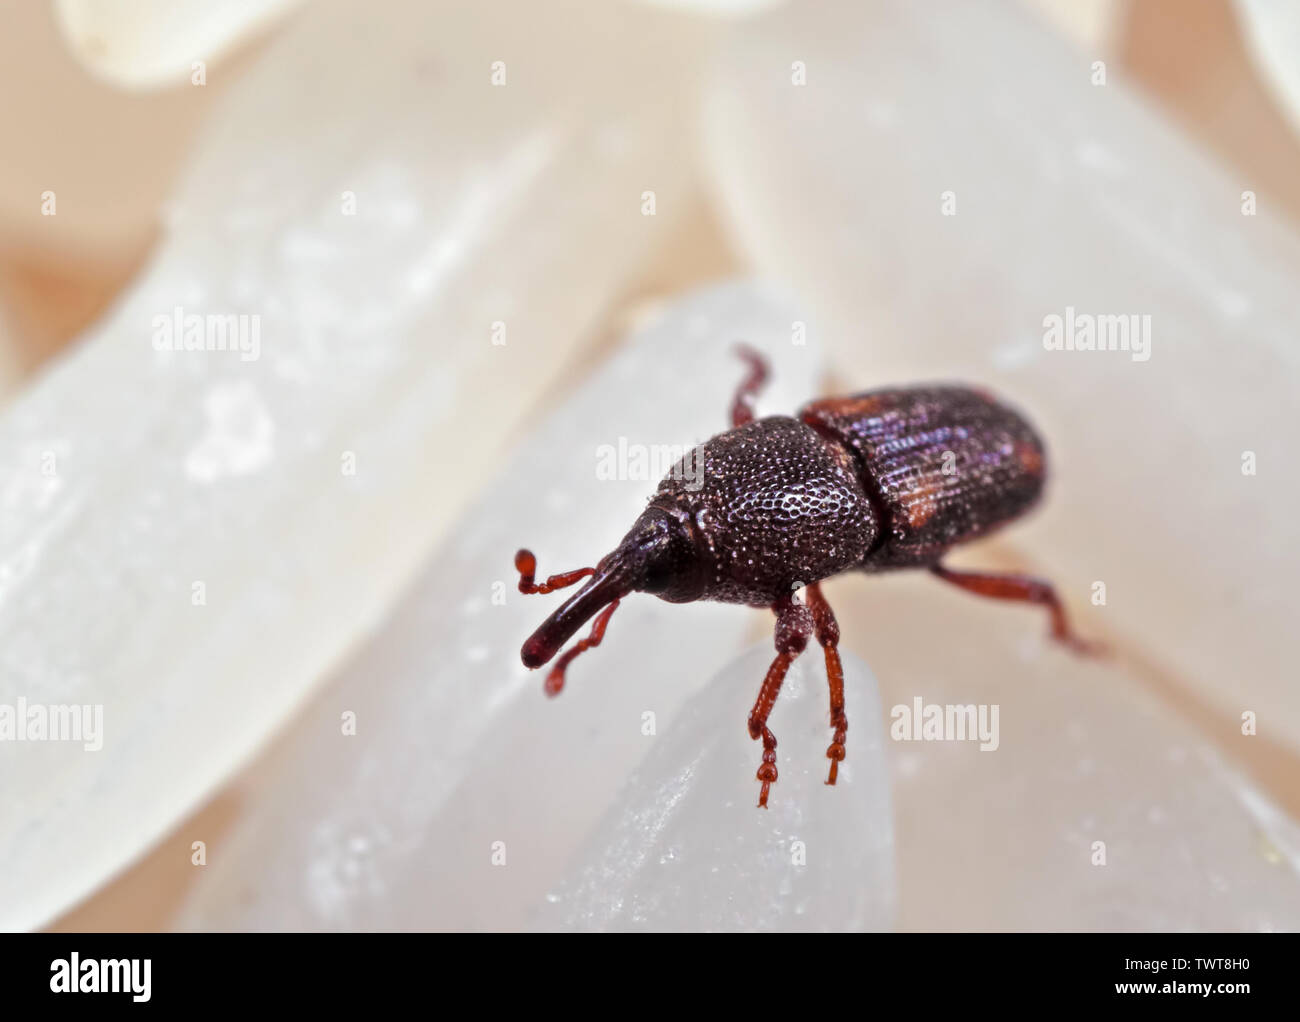 Macro Photography of Rice Weevil or Sitophilus oryzae on Raw Rice Stock Photo